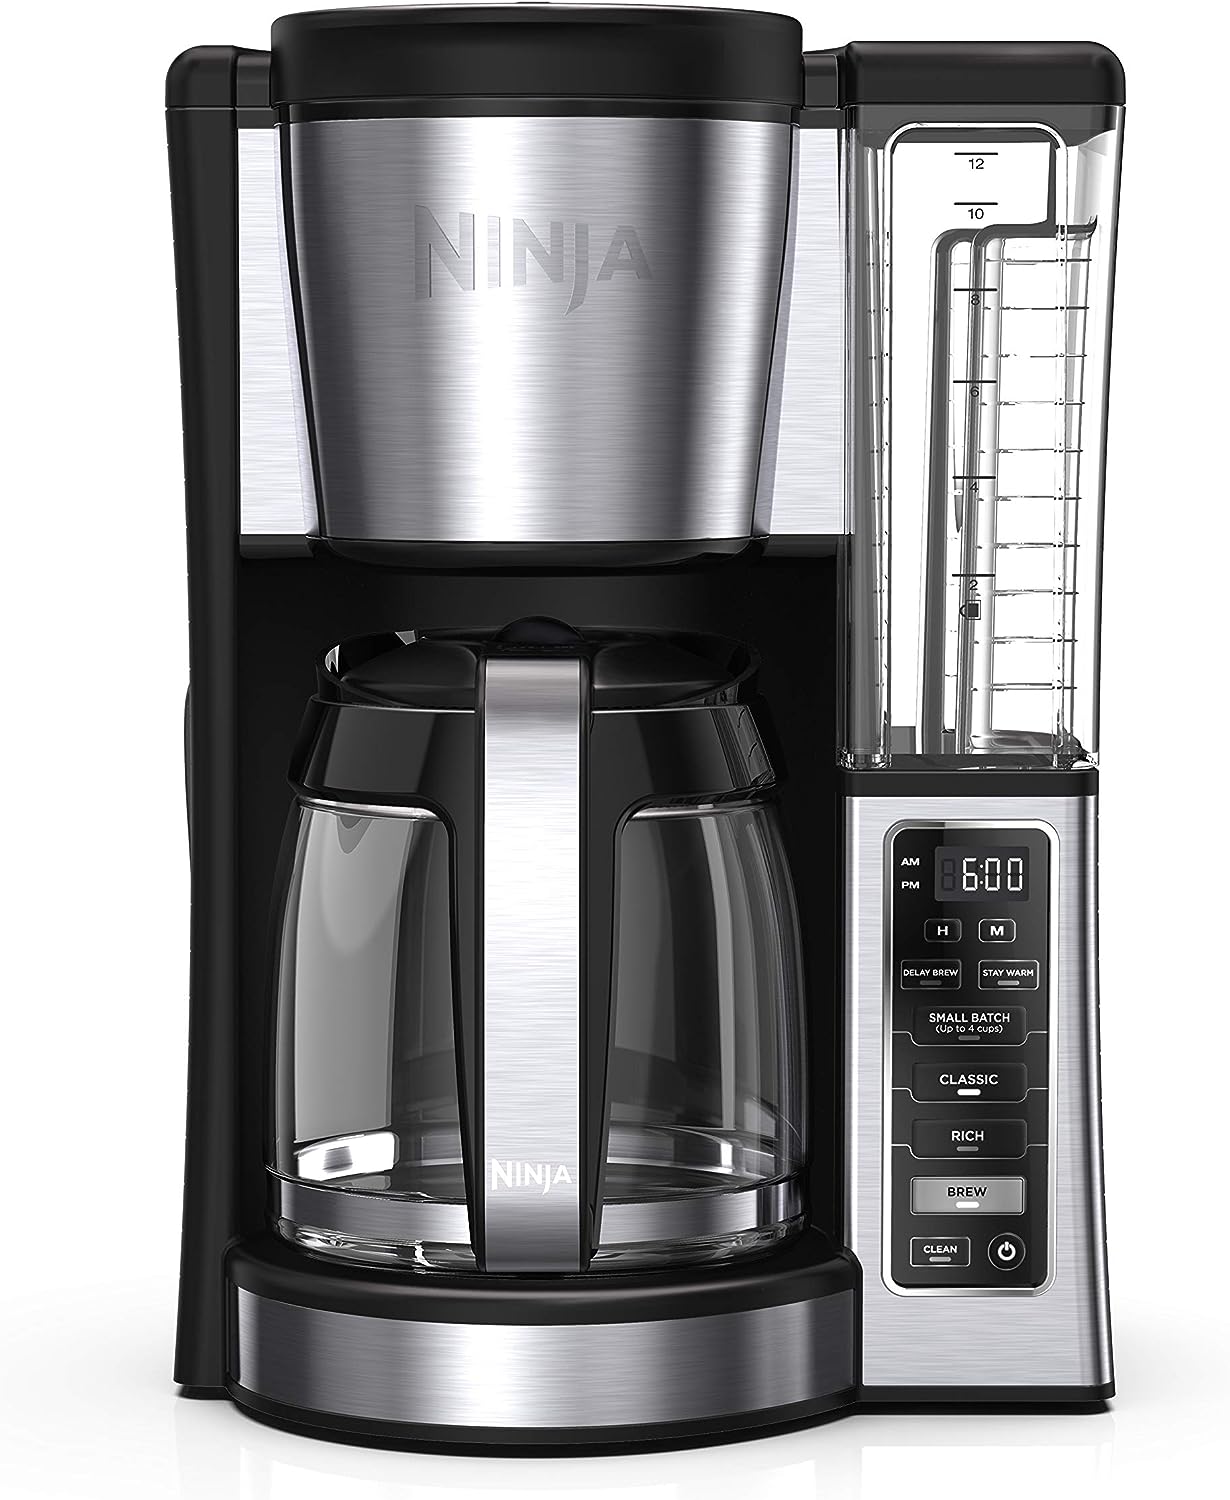 Ninja CE251 Programmable Brewer Review